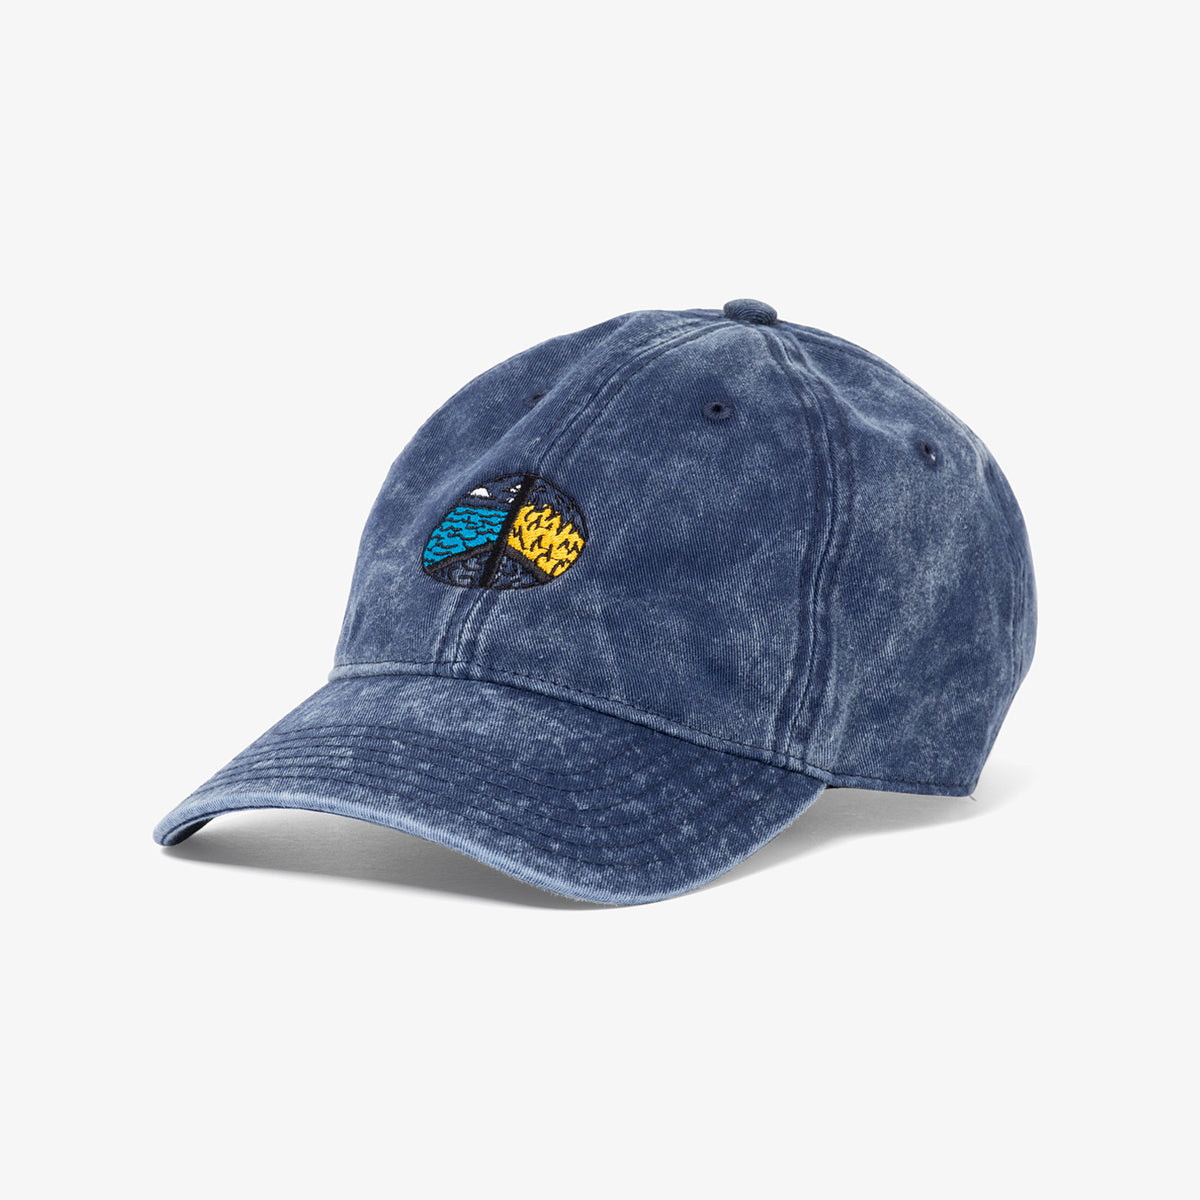 Peaceful Embroidered Hat (Blue)